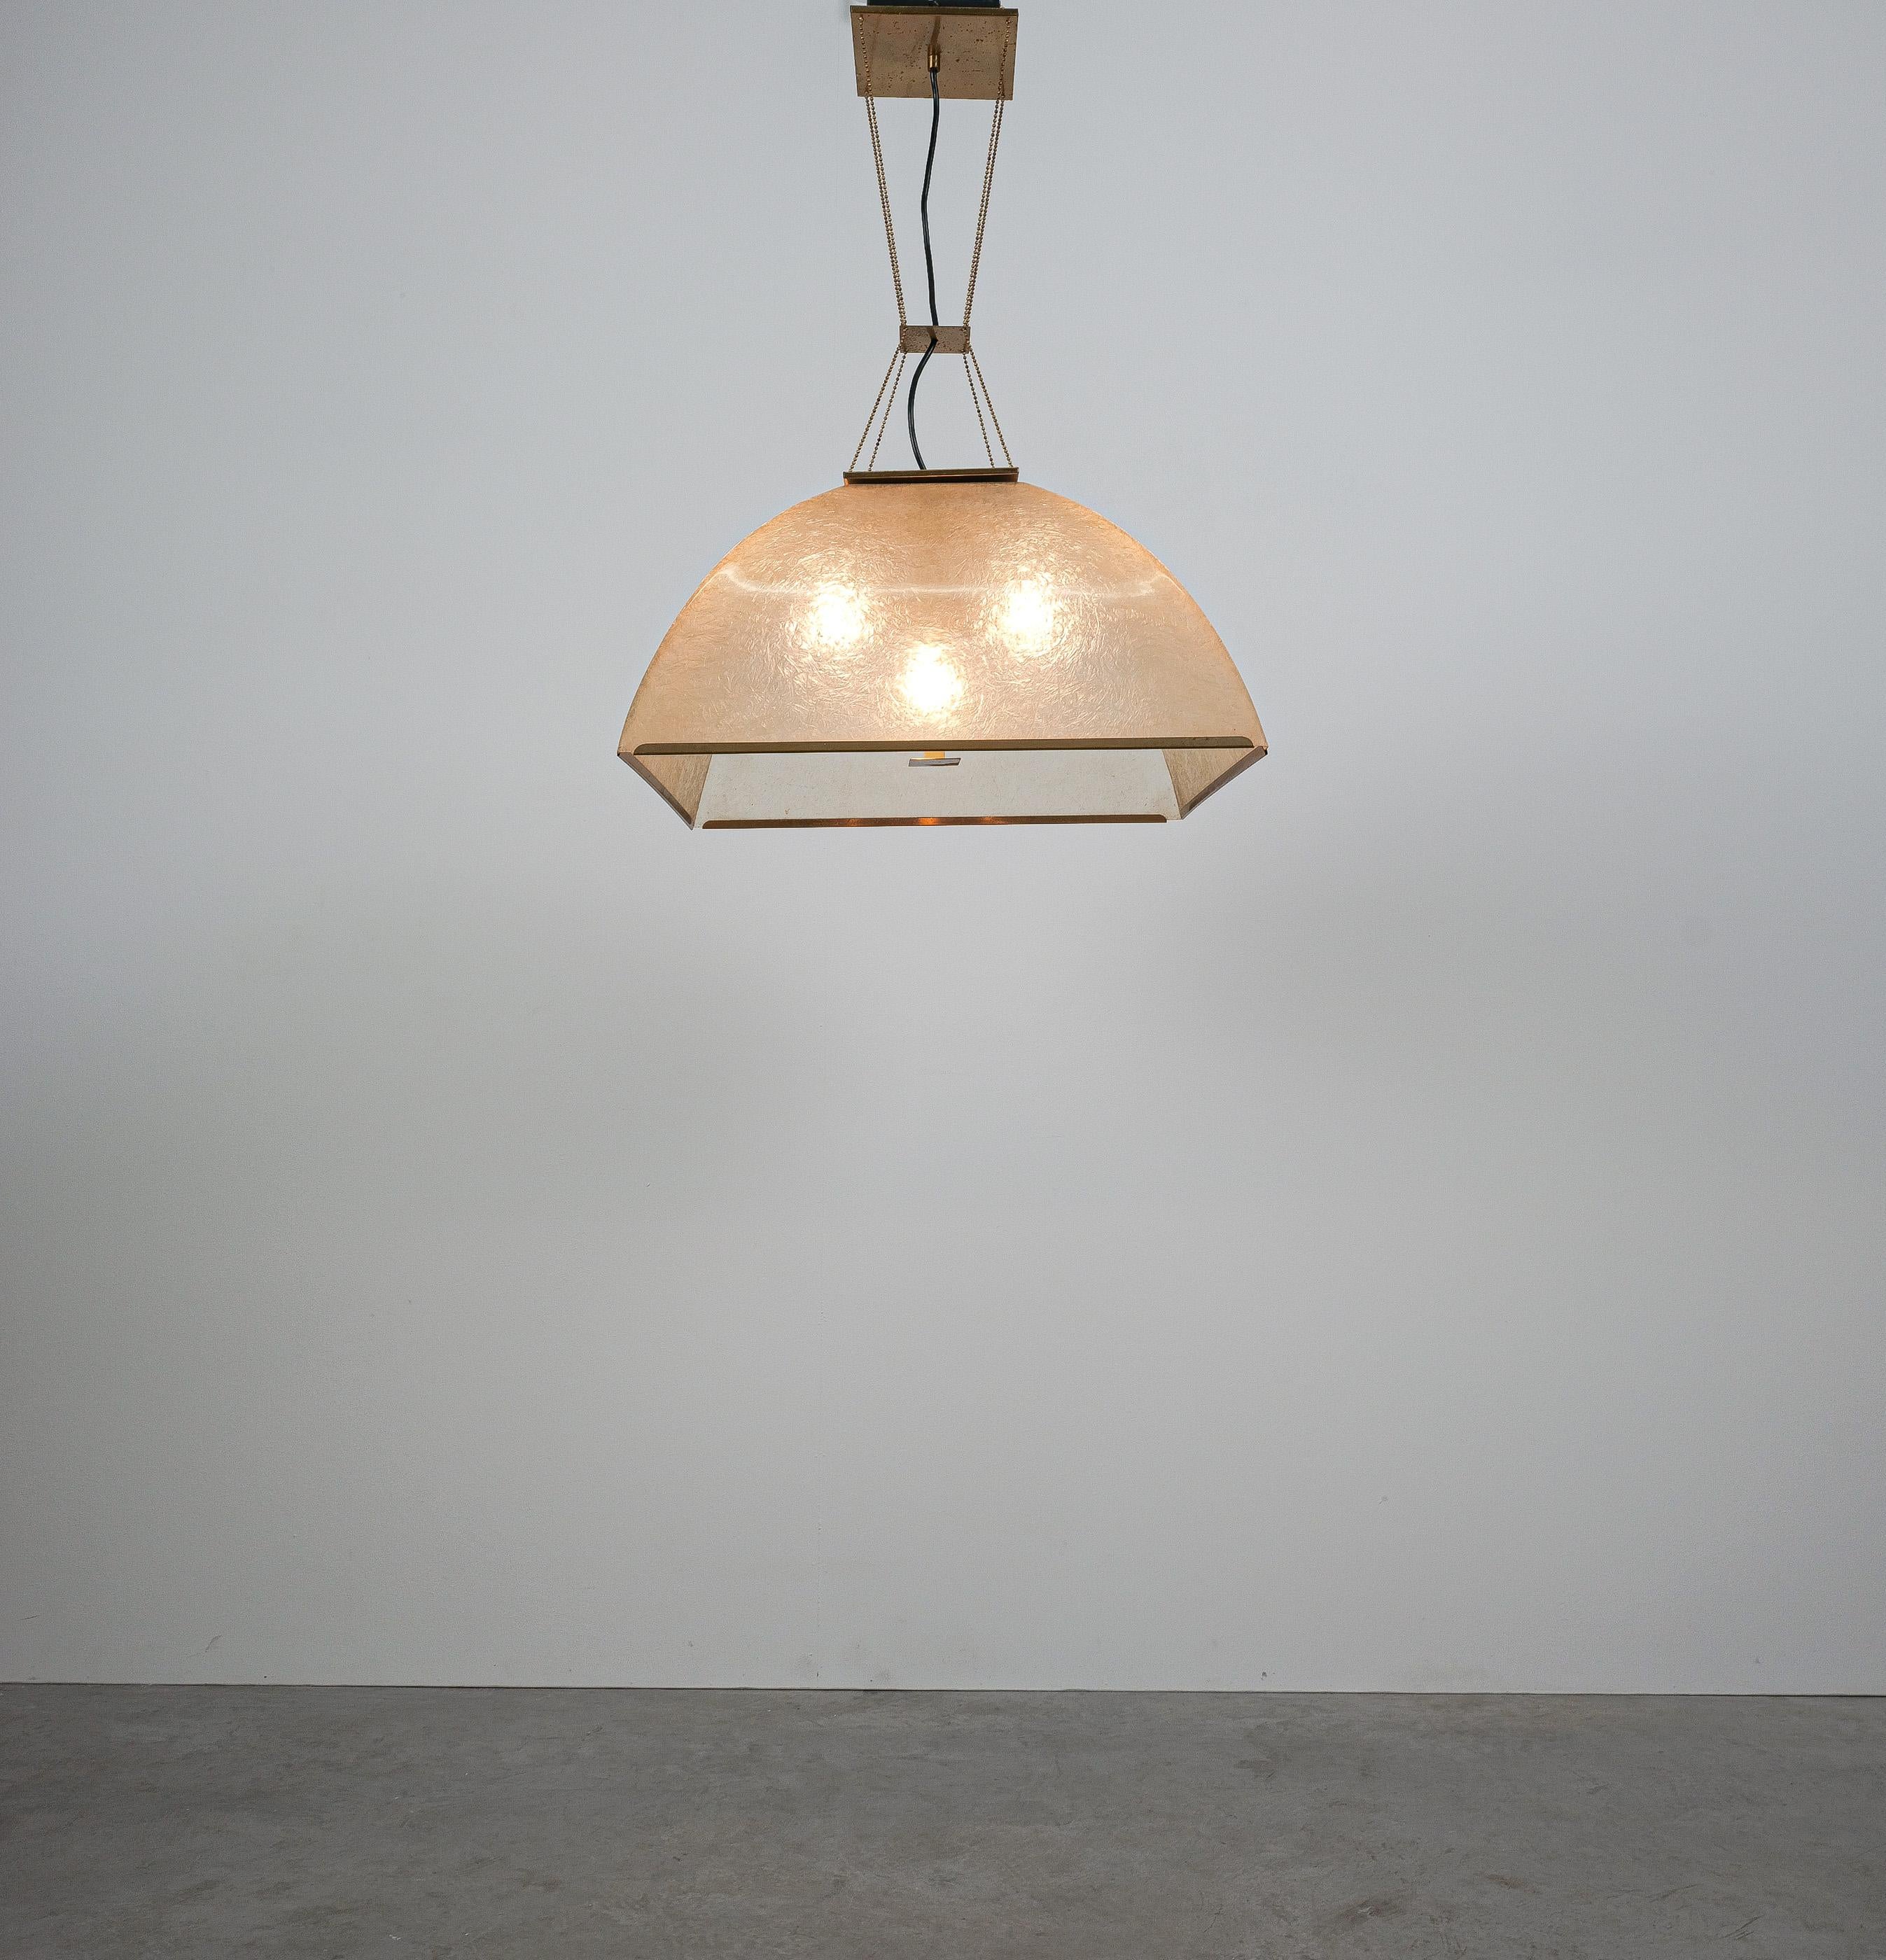 Salvatore Gregorietti, chandelier, fiberglass, brass, Italy, 1960s, labeled Lamperti

Sculptural chandelier by Italian designer Salvatore Gregorietti. The pendant consists of a huge fiberglass shade with 4 bulbs hanging from four brass 'pearl'